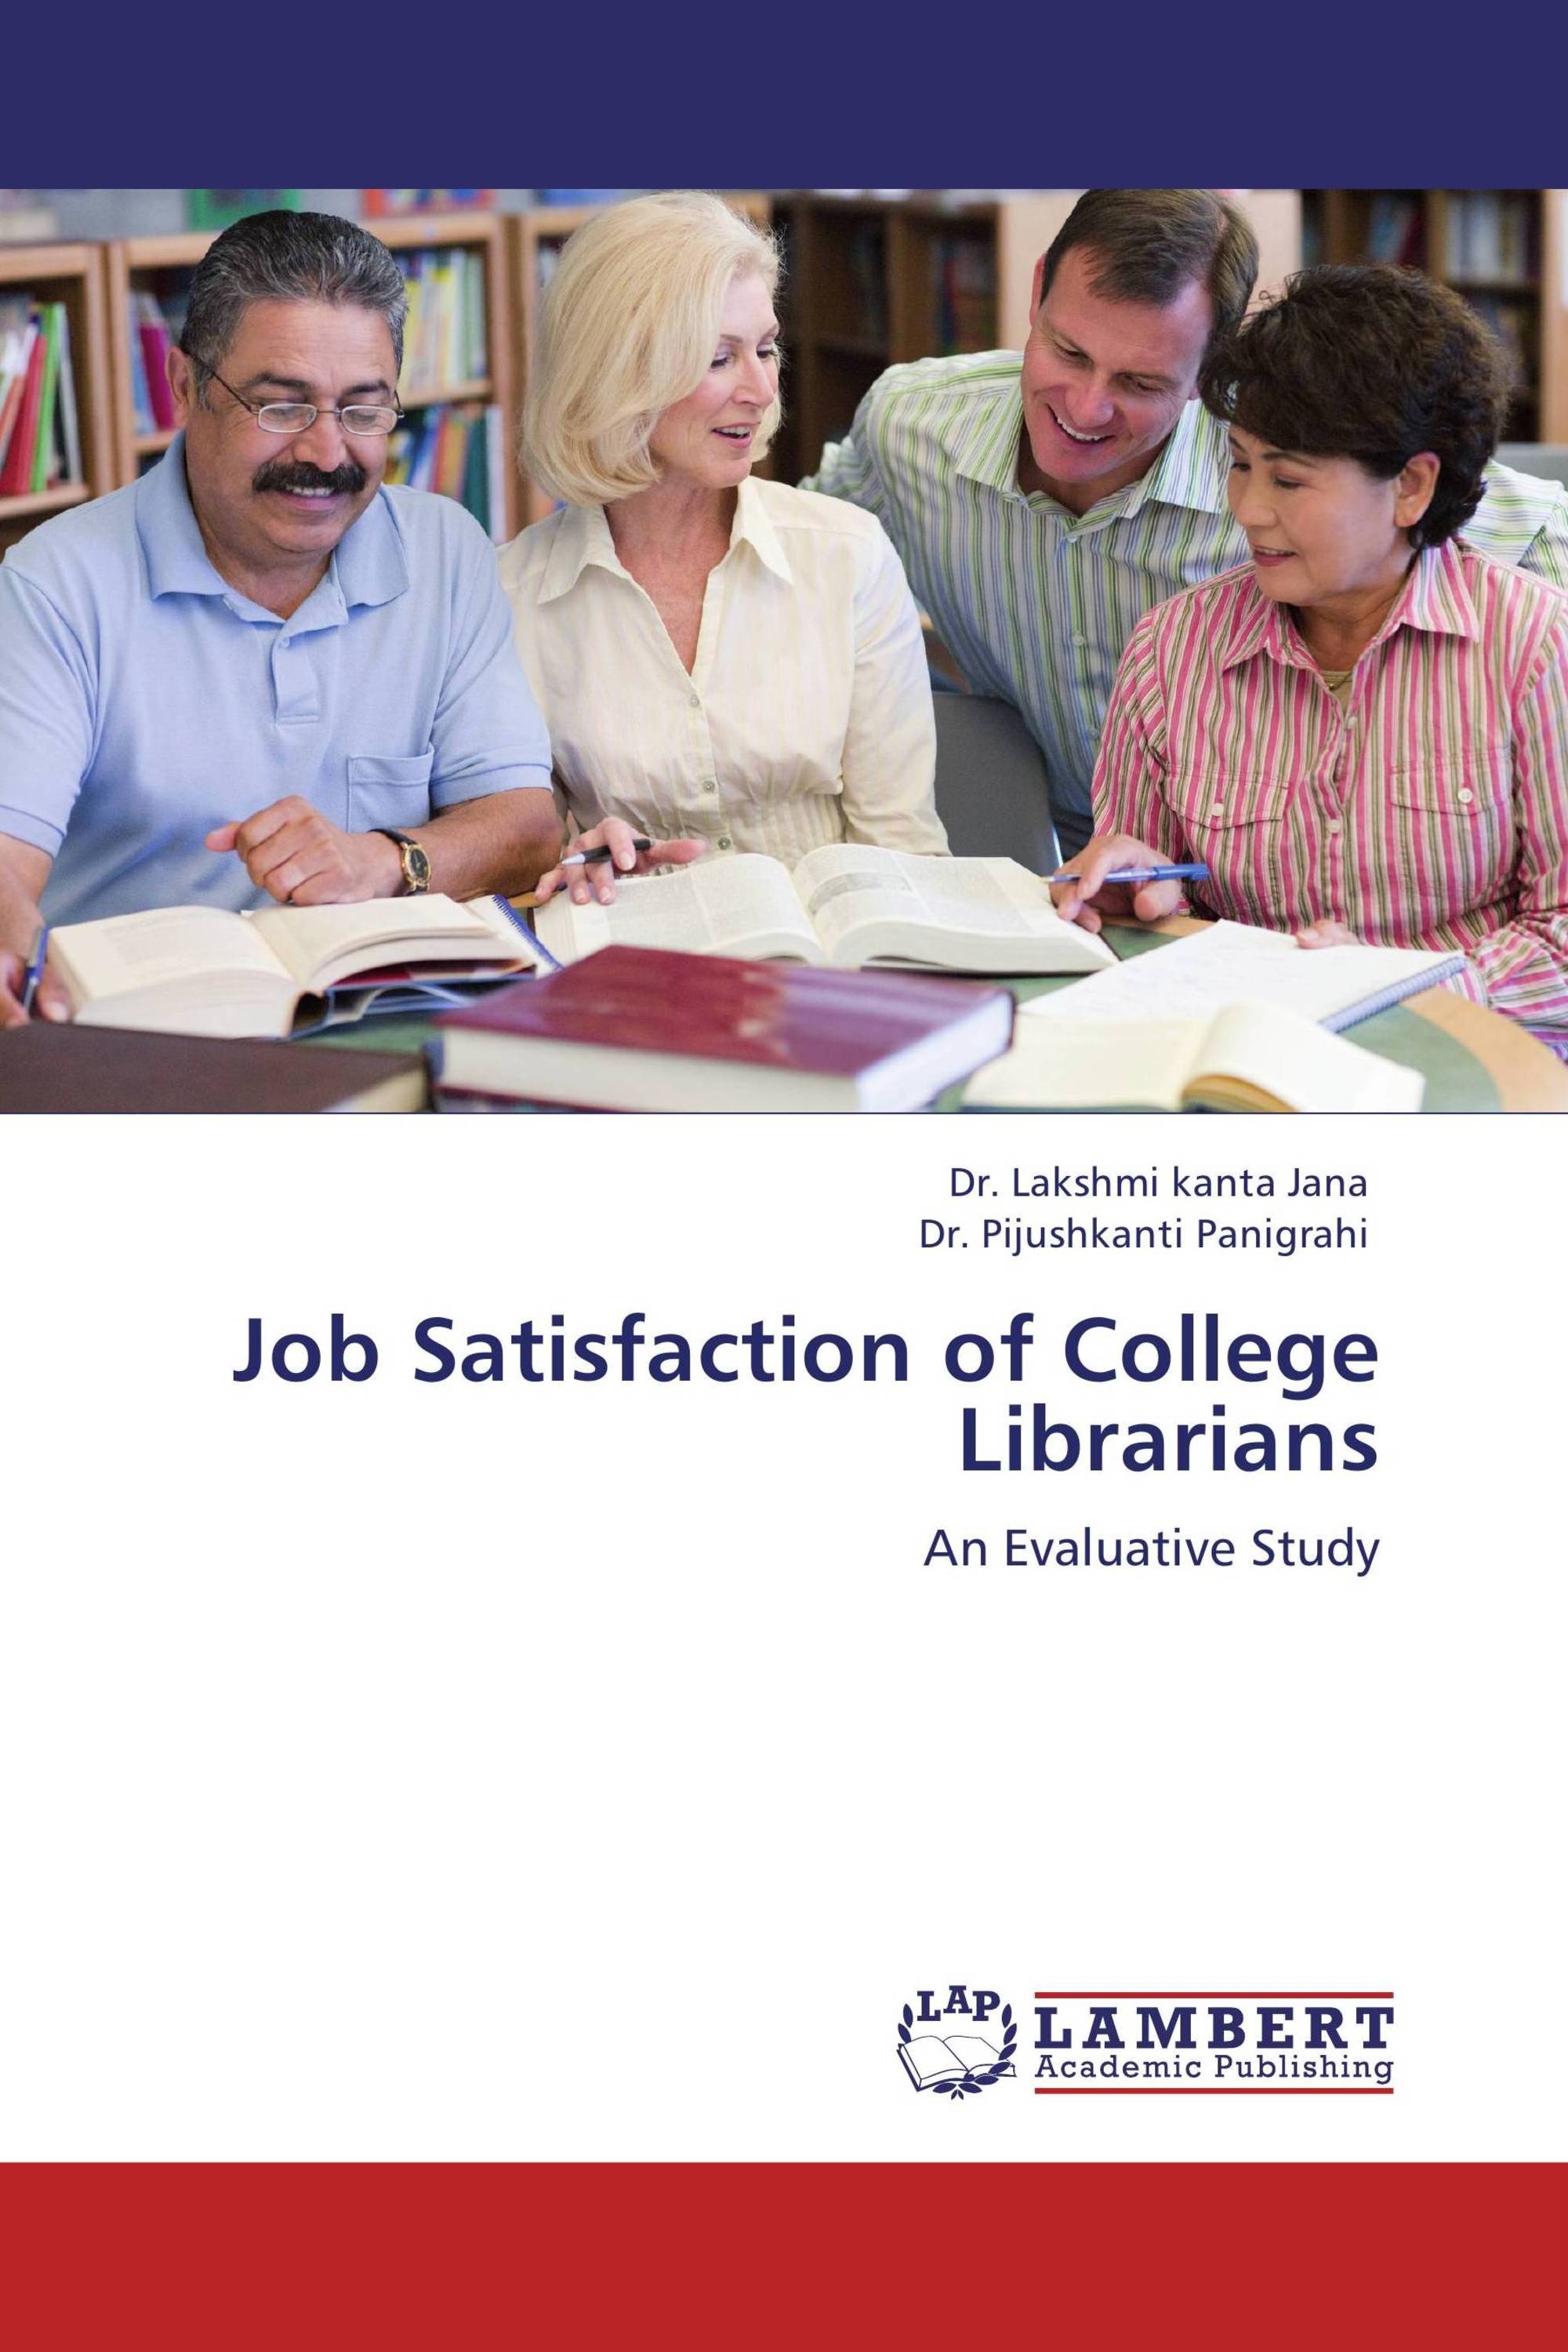 Job satisfaction of library professionals